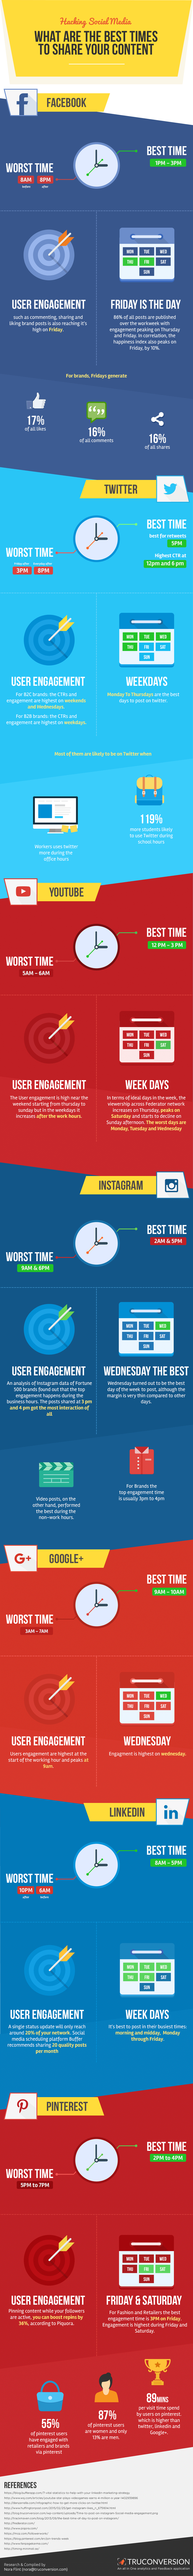 Best time to post on Social media